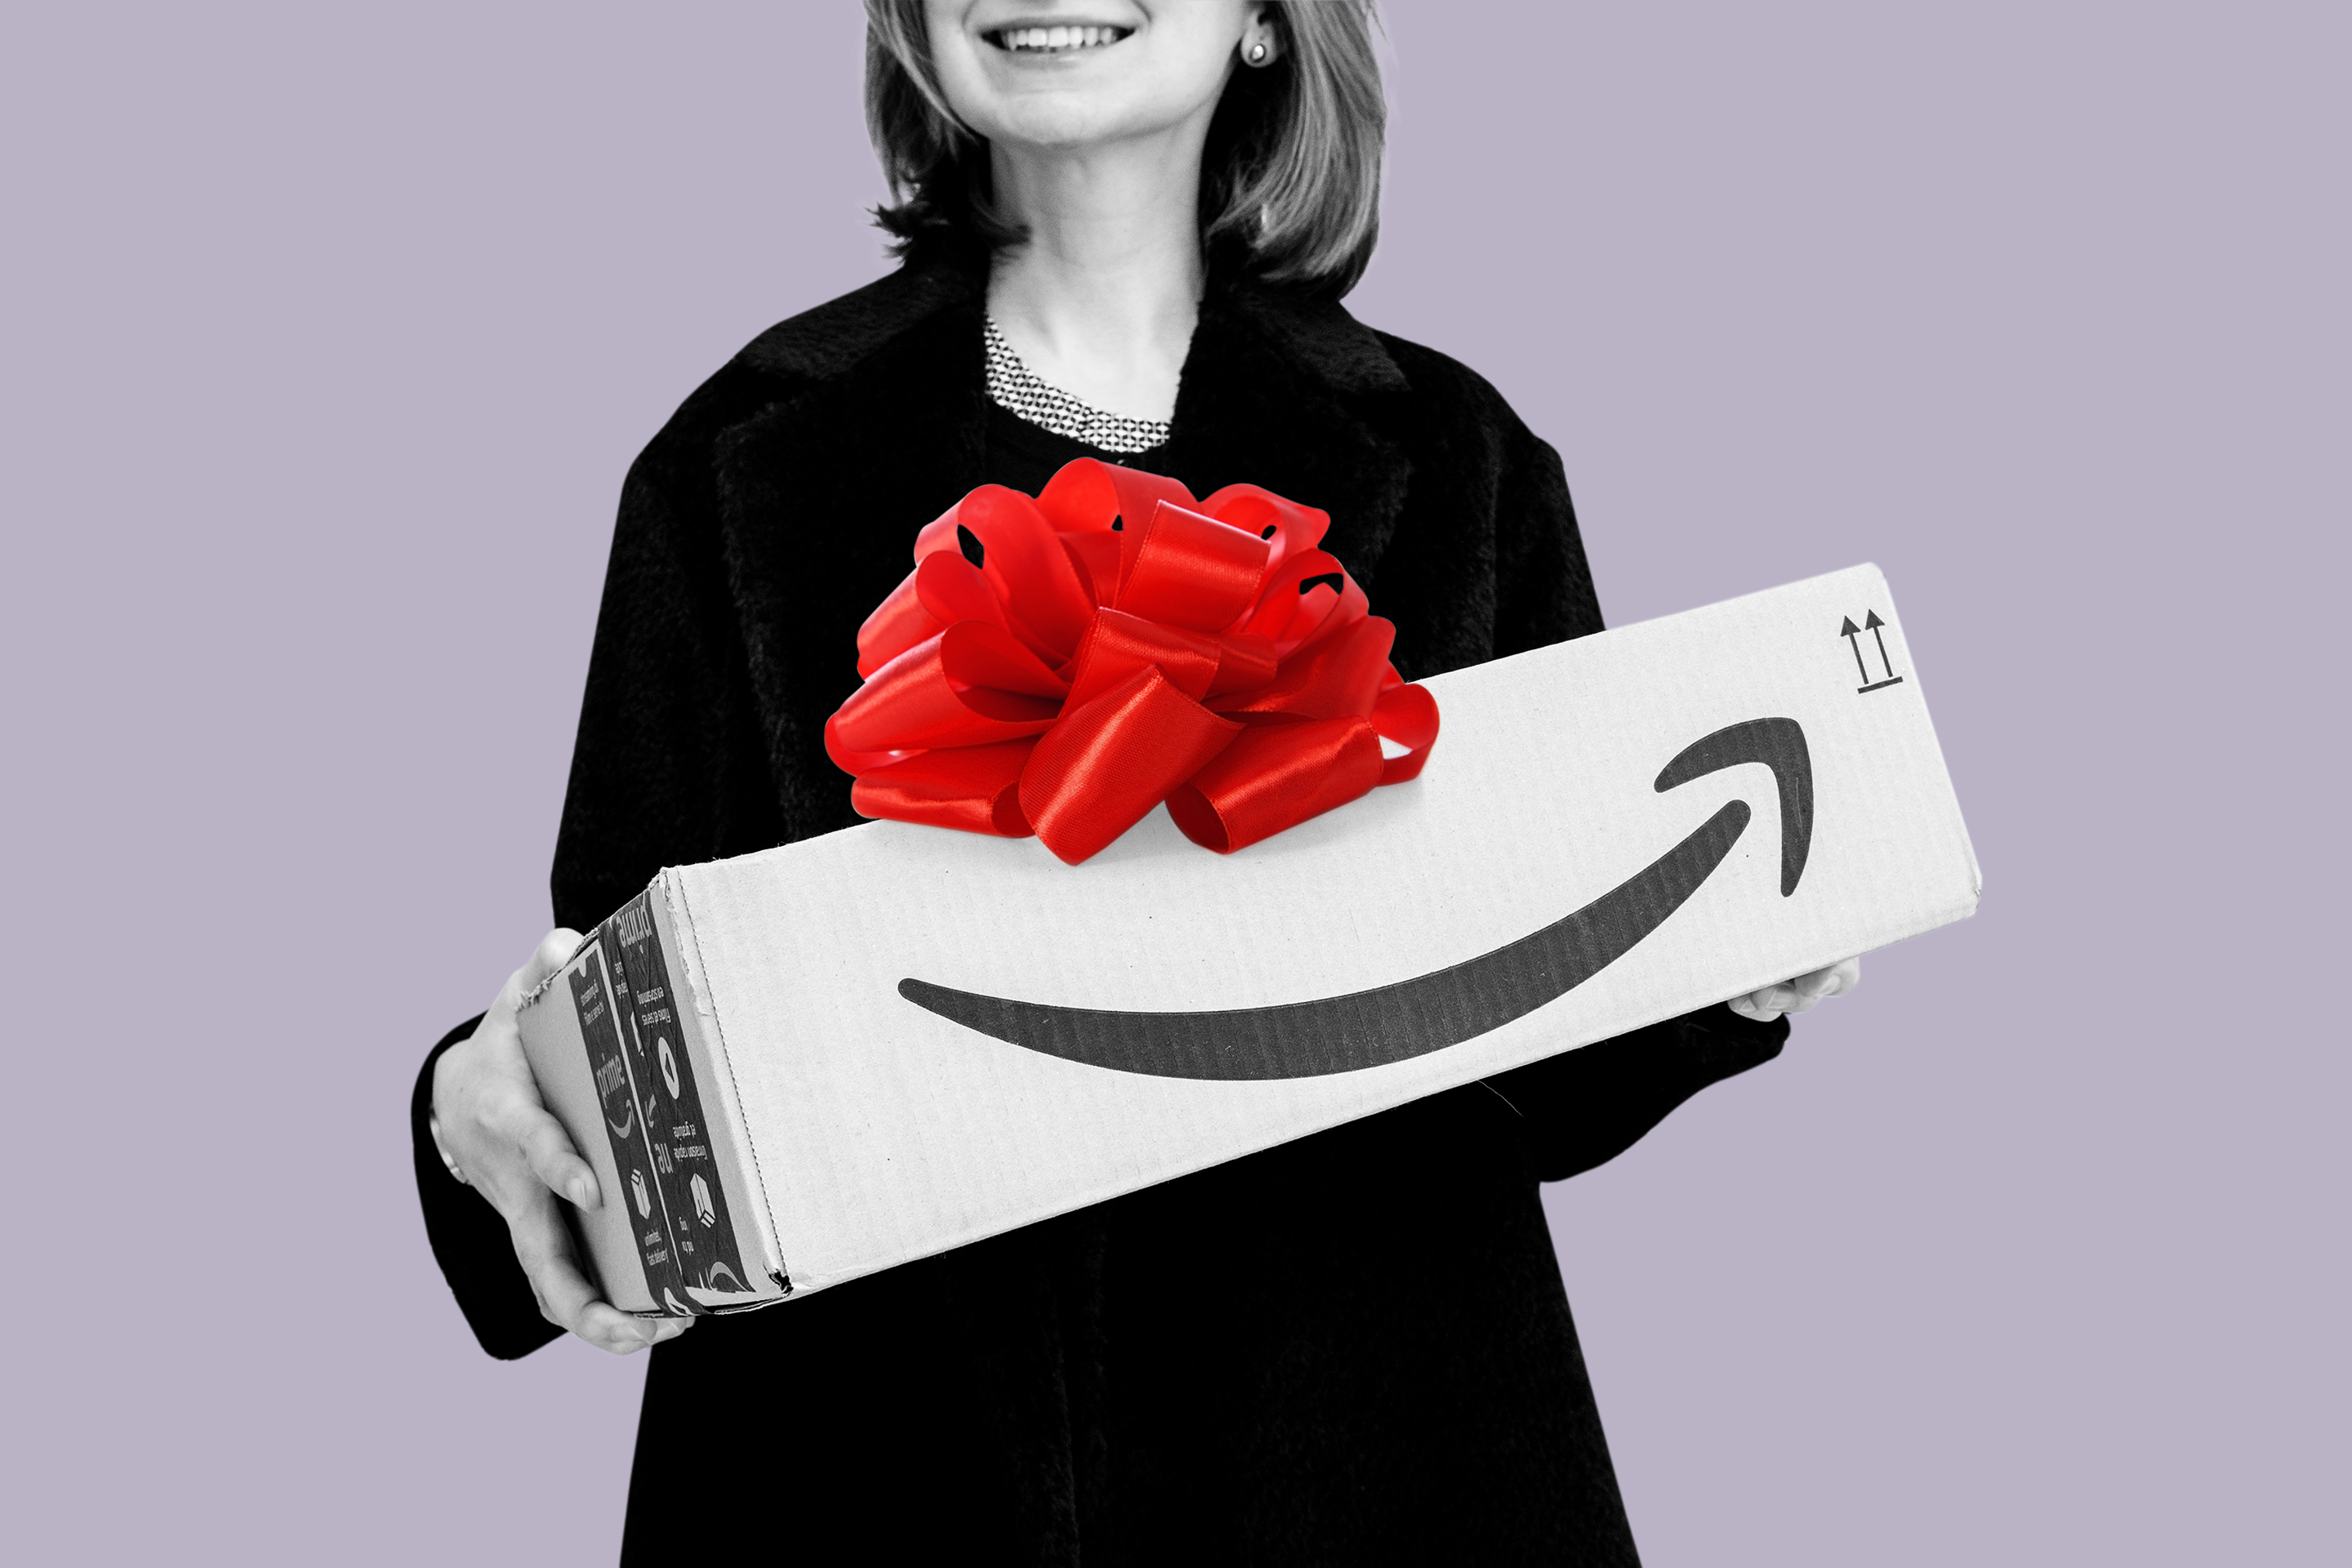 How To Return Amazon Gifts Without The Sender Knowing (Guide)